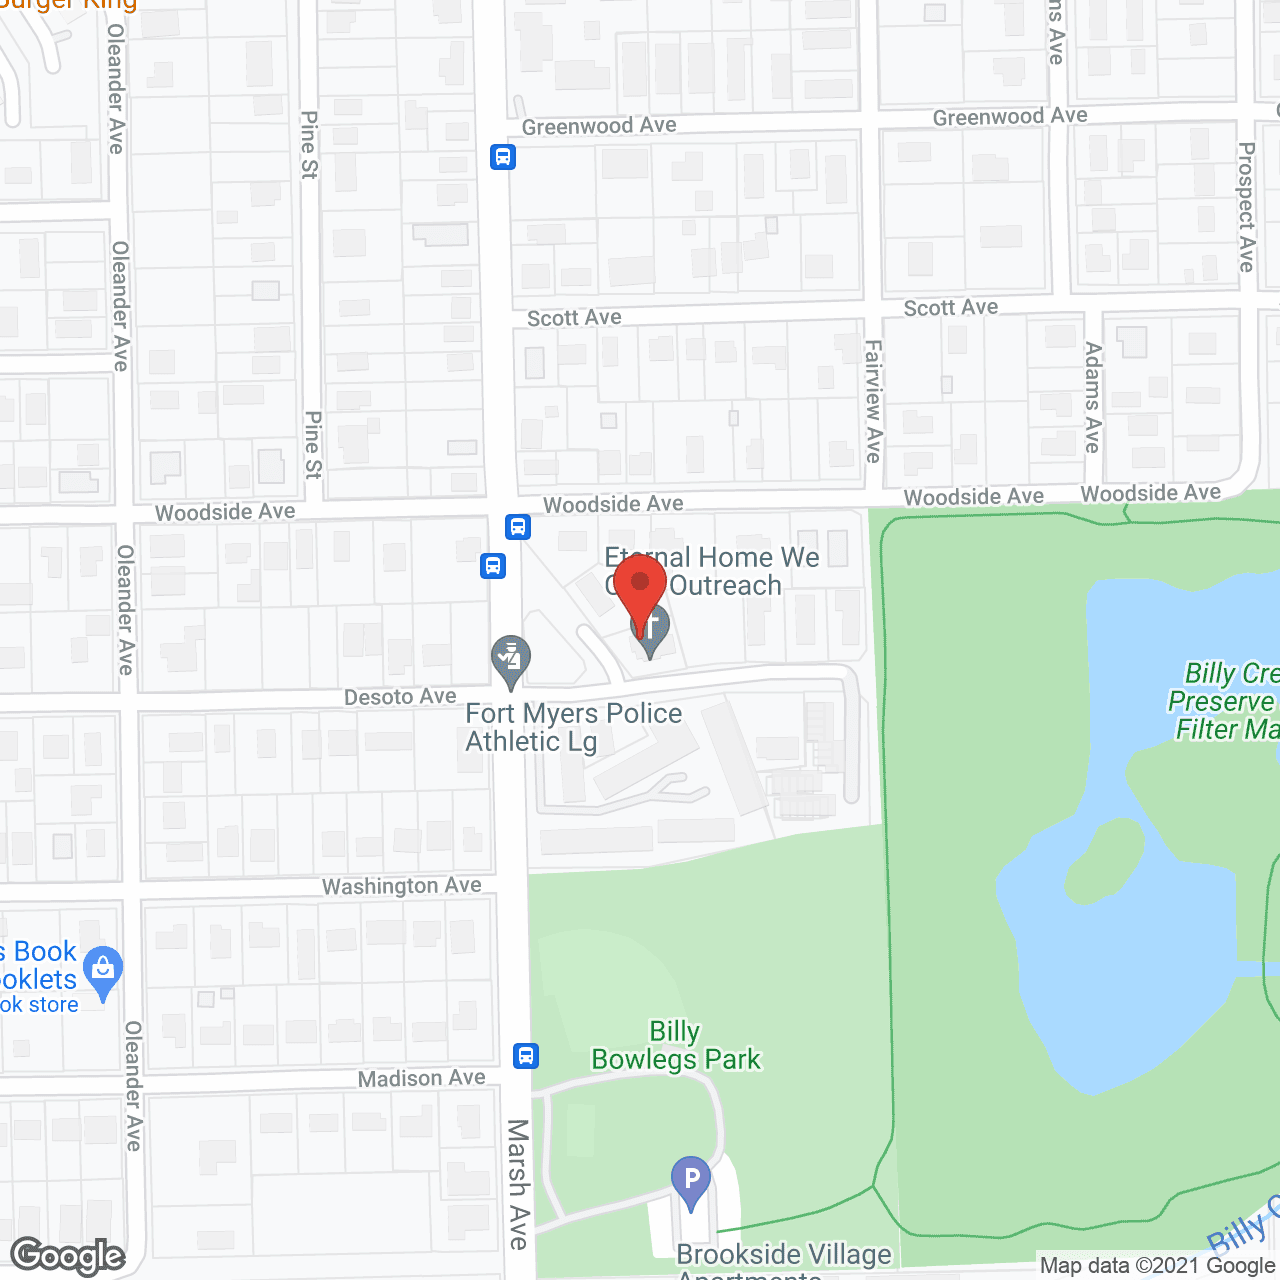 Rosewood Aclf Inc in google map